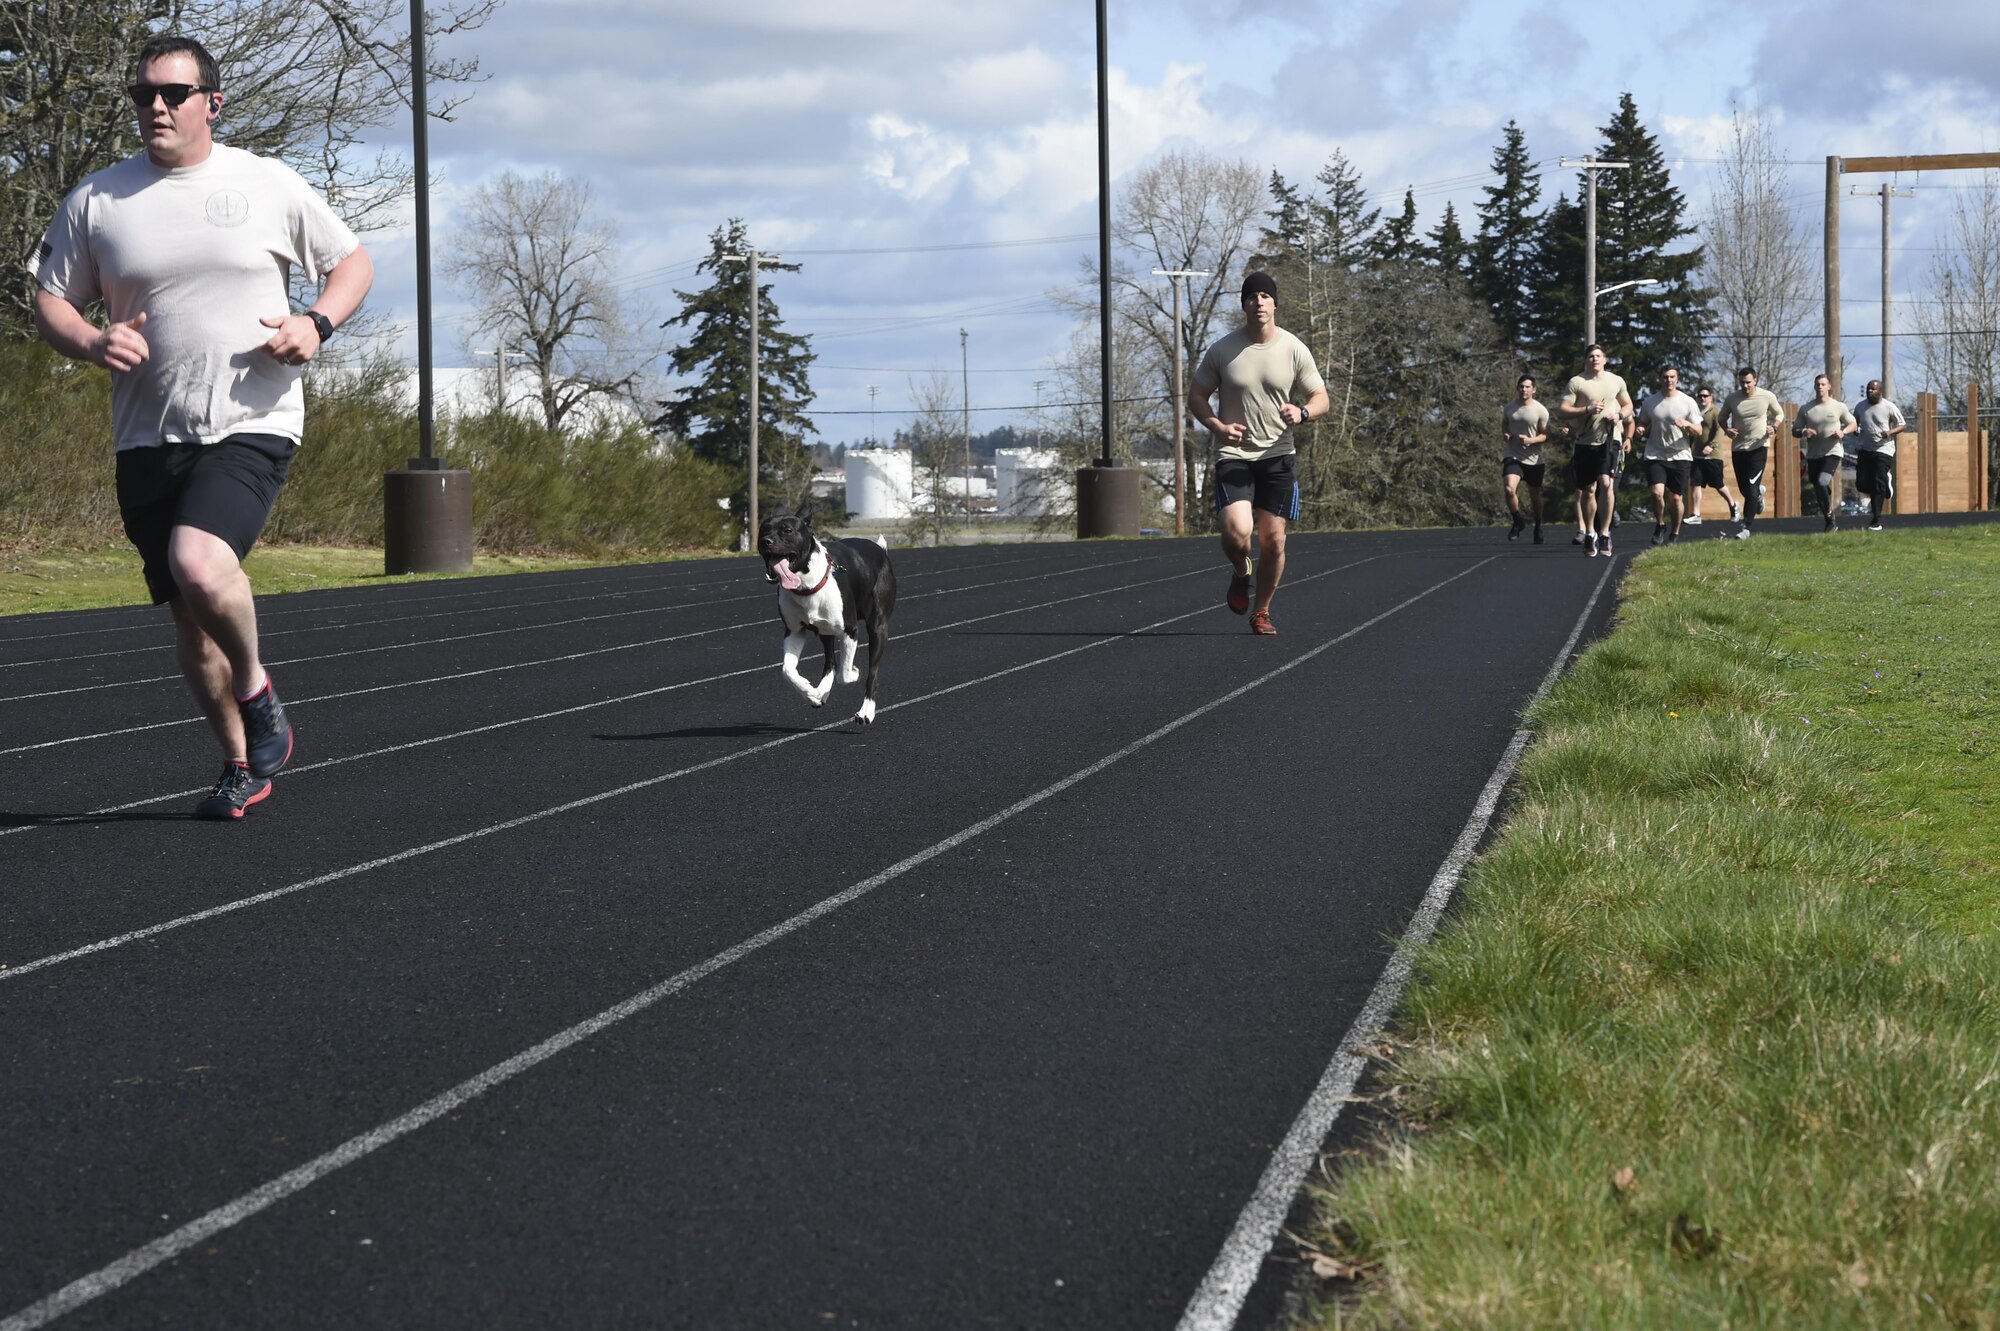 Members and pets of the 1st Air Support Operations Group, 194th ASOG, 62nd Airlift Wing and Joint Base Lewis- McChord, Wash., run and walk on the McChord Field outdoor track, March 31, 2017, to honor TACP Airmen who have died in combat or training  and to raise money and awareness for the Tactical Air Control Party Association. The goal of the annual 24-hour run is to give back to the families and this year the TACP-A collected more than $6,000 in donations. (Air Force Photo/ Staff Sgt. Naomi Shipley)